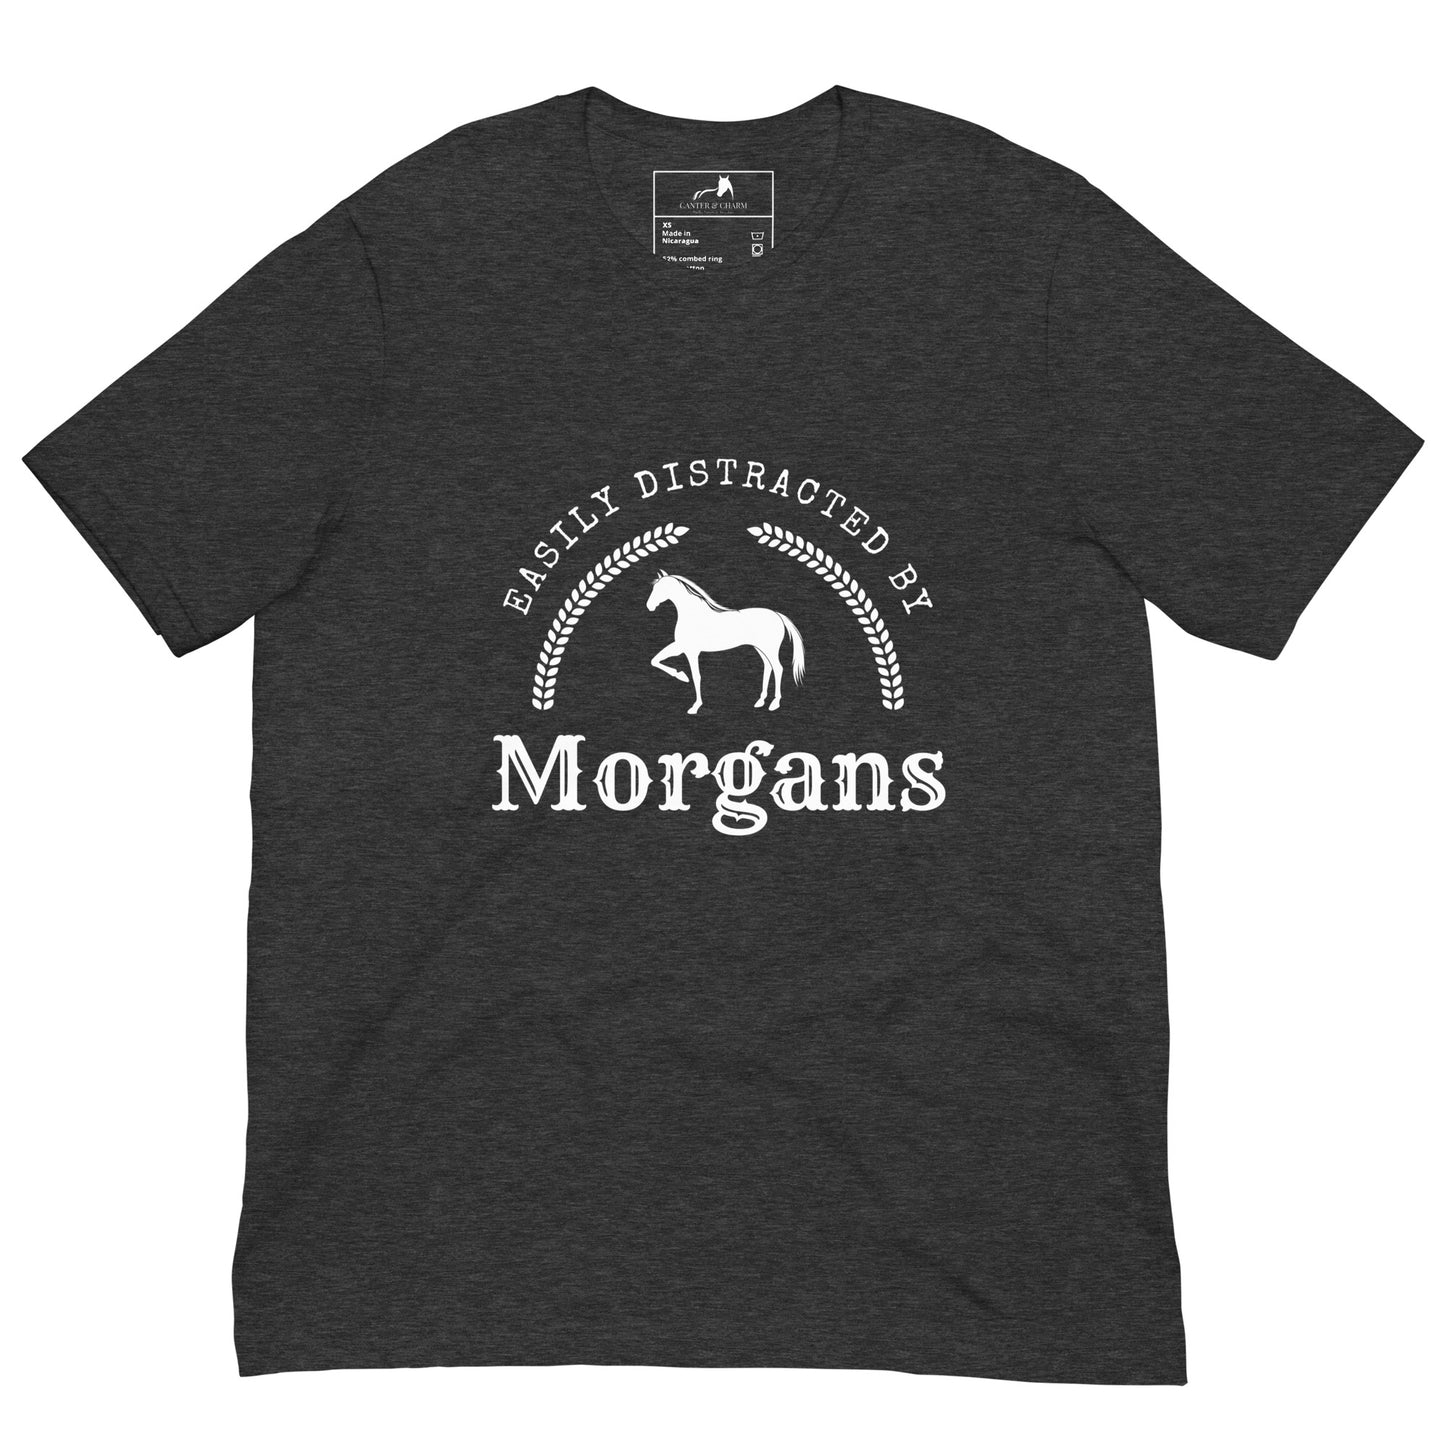 Easily Distracted by Morgans Tee - Adult Sizes - Horse Breed Enthusiast - Morgan Horse Lover - Equestrian Apparel - Equine Fashion